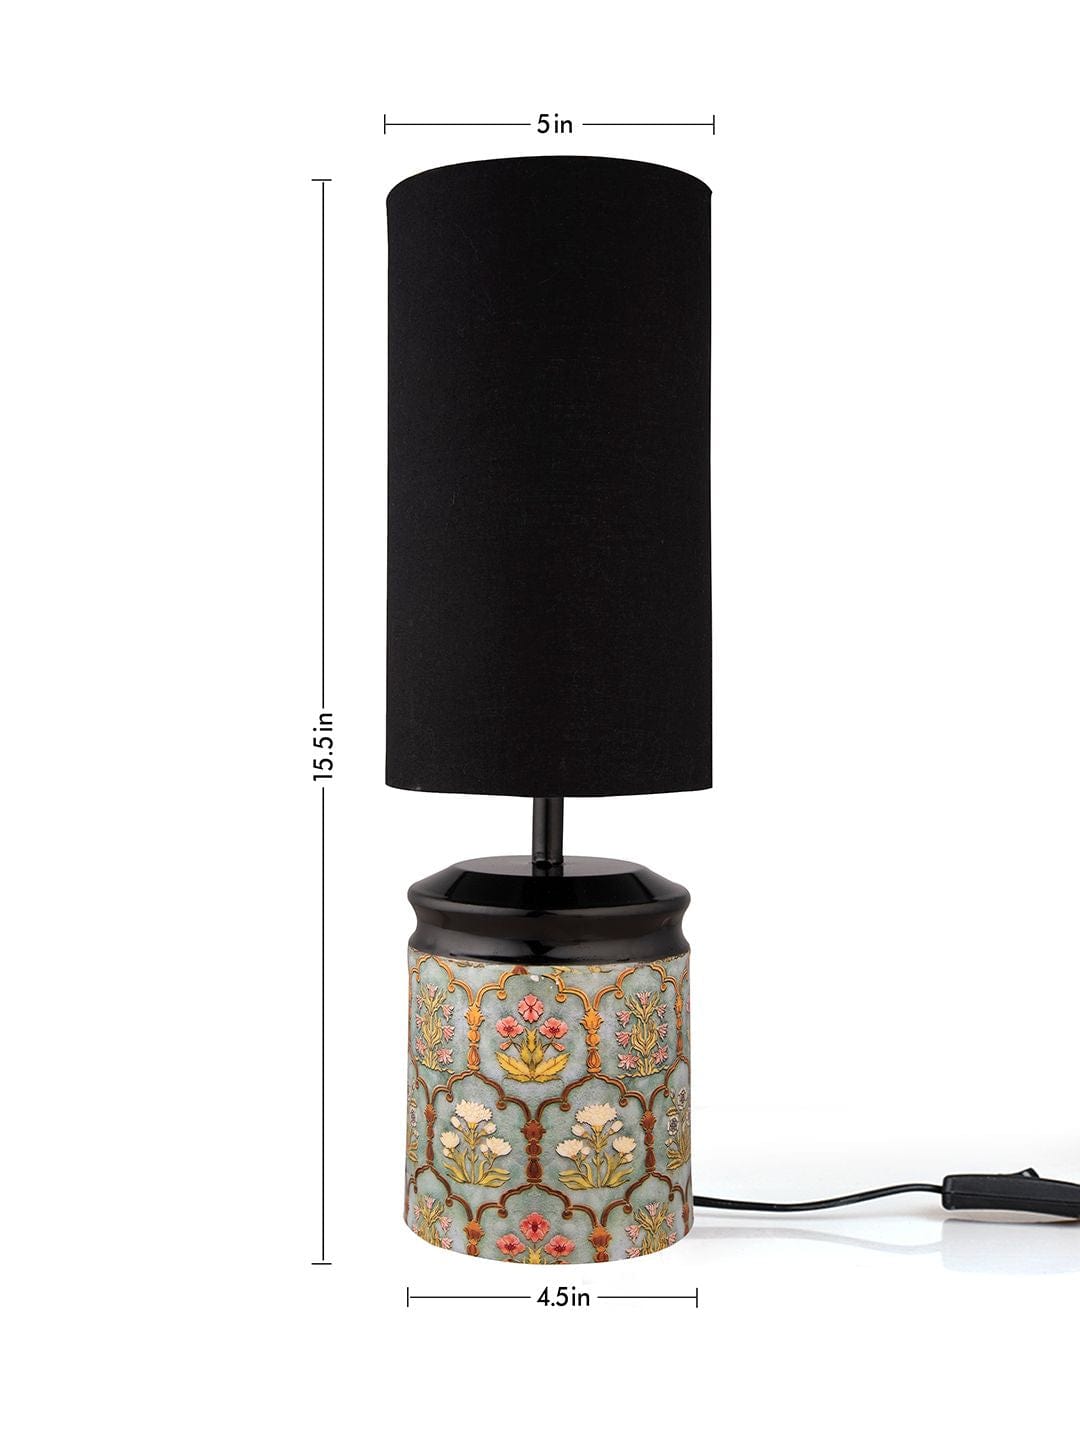 Metal Antique Motif printed Lamp with Solid Black Shade